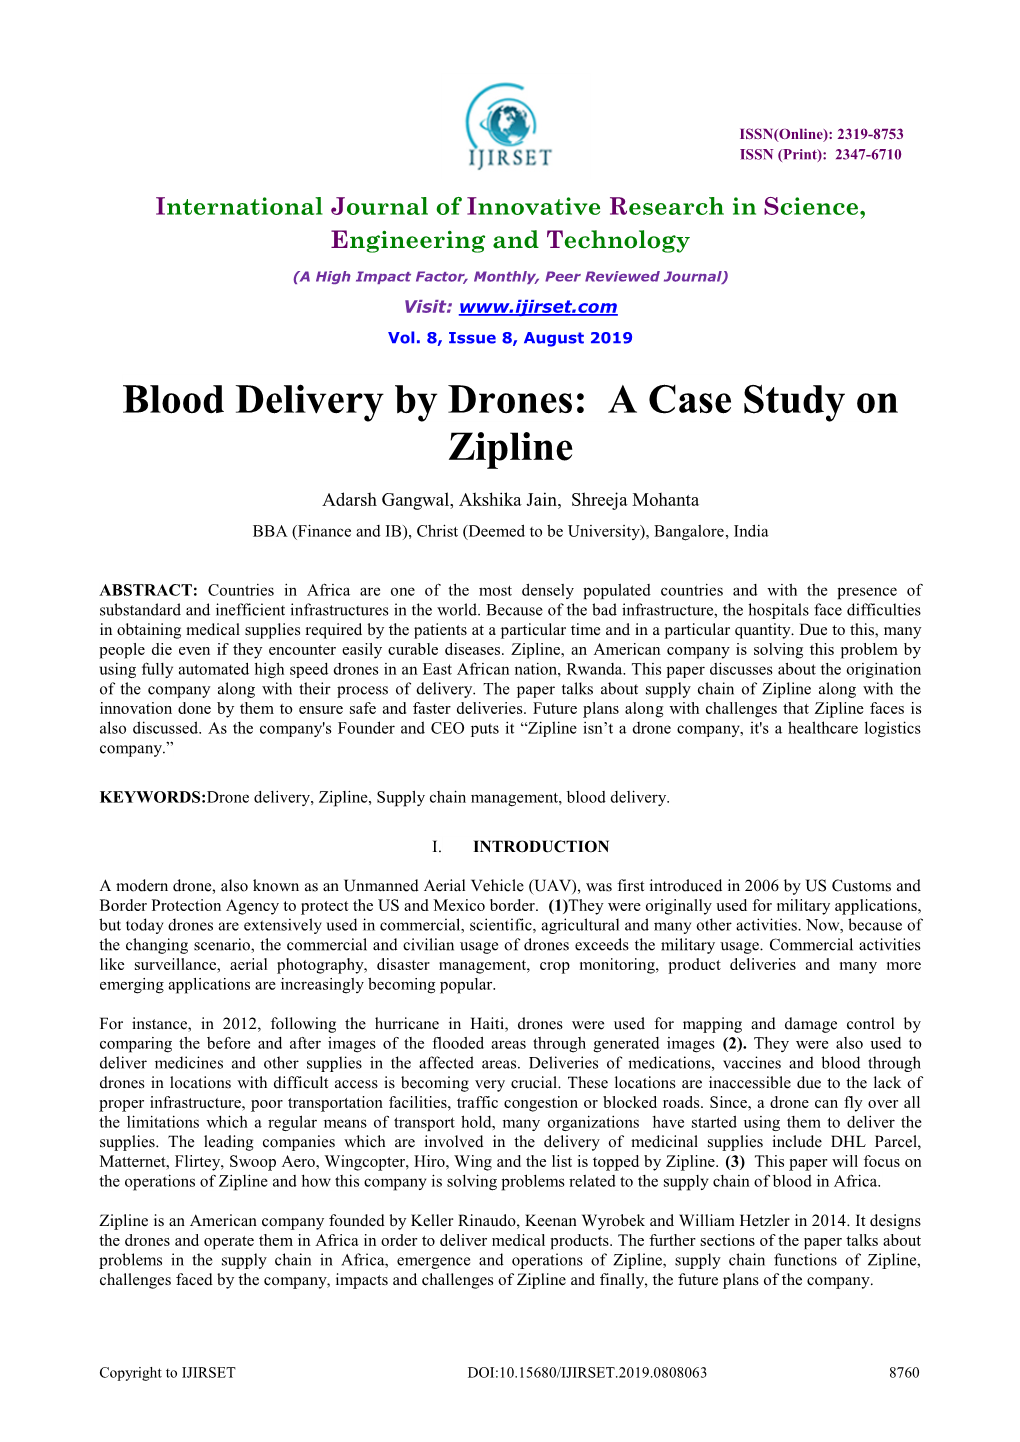 Blood Delivery by Drones: a Case Study on Zipline